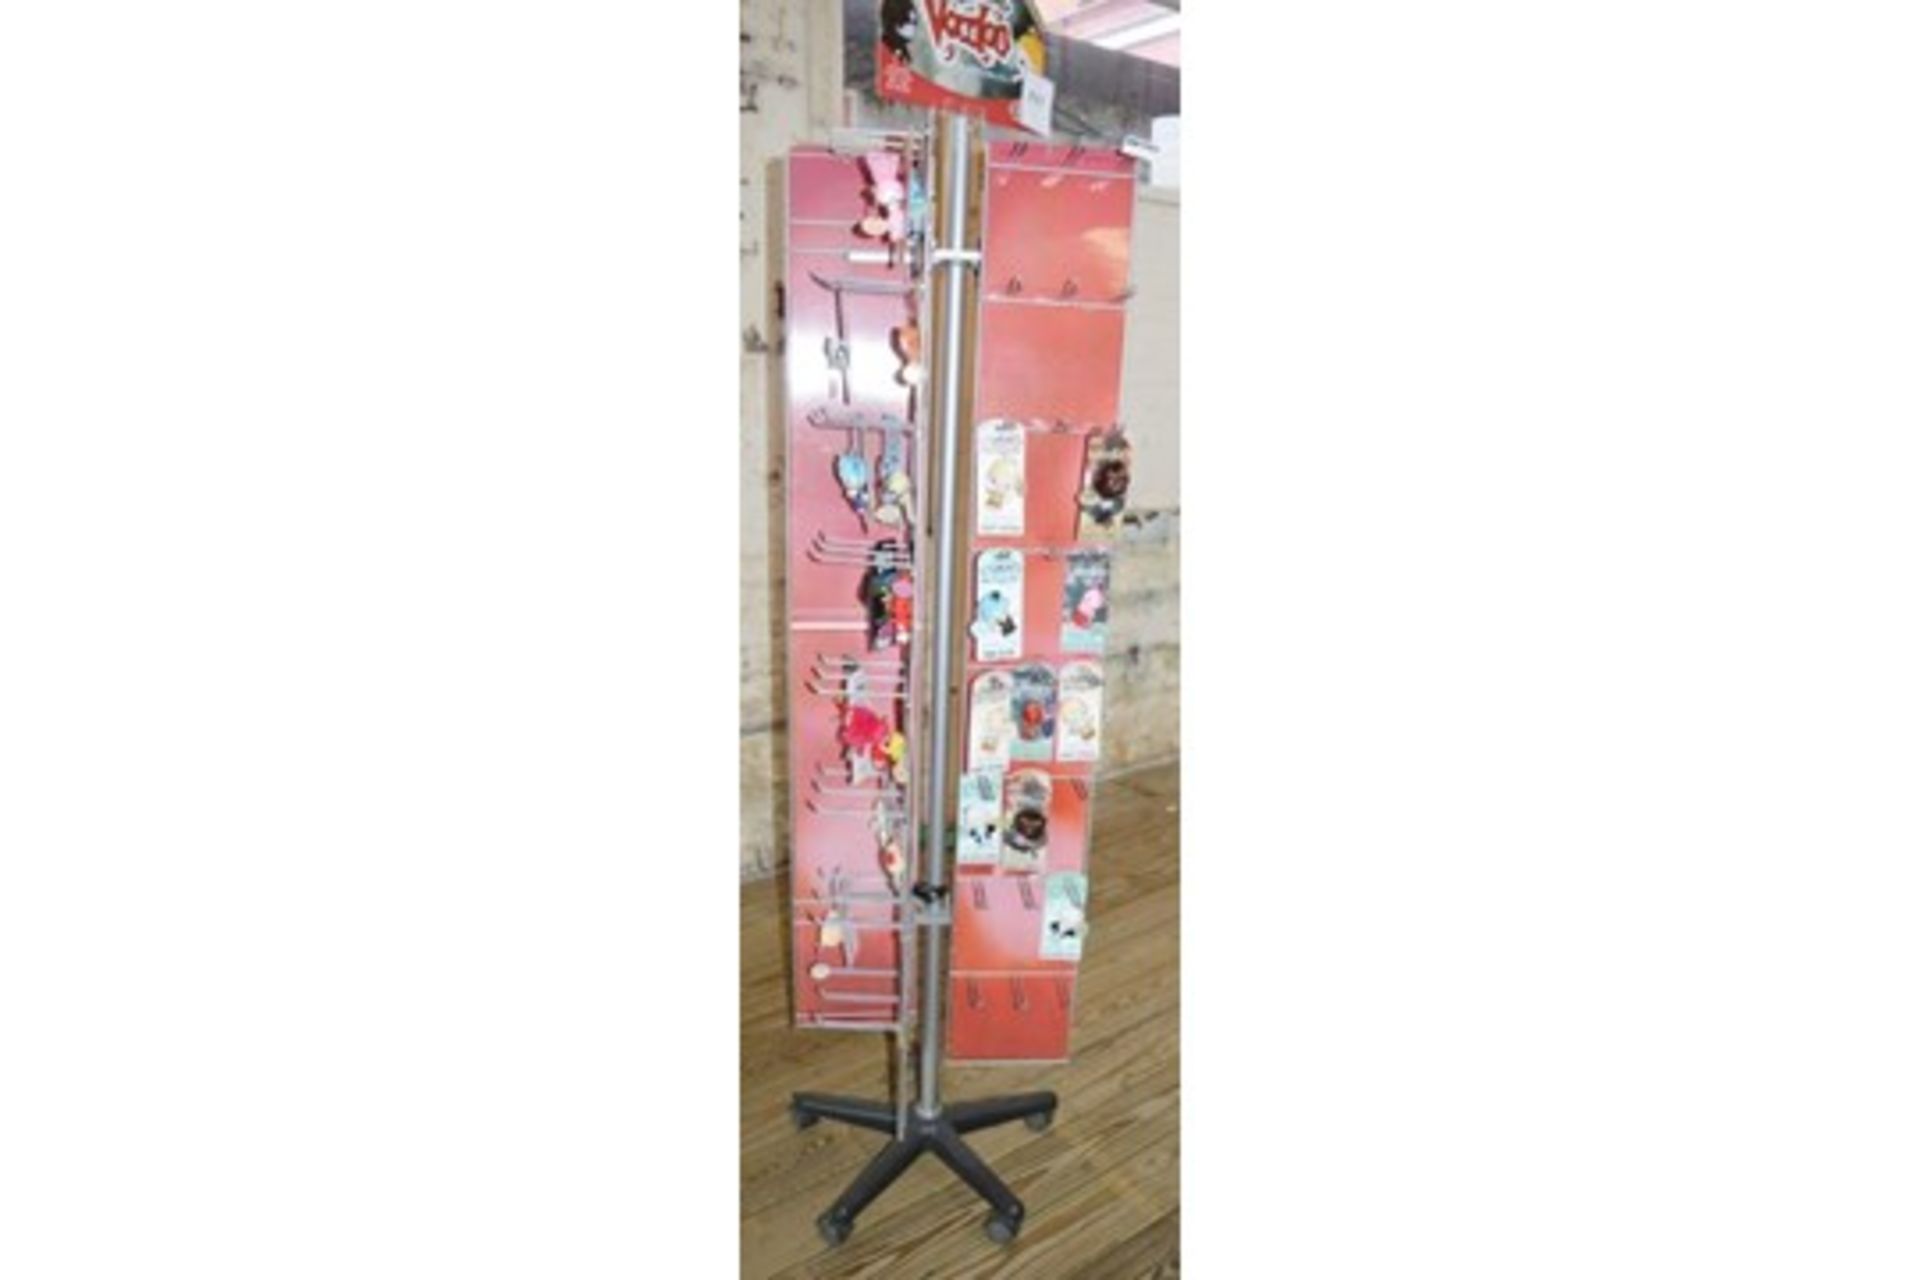 27 x Retail Carousel Display Stands With Approximately 2,800 Items of Resale Stock - Includes - Image 29 of 61